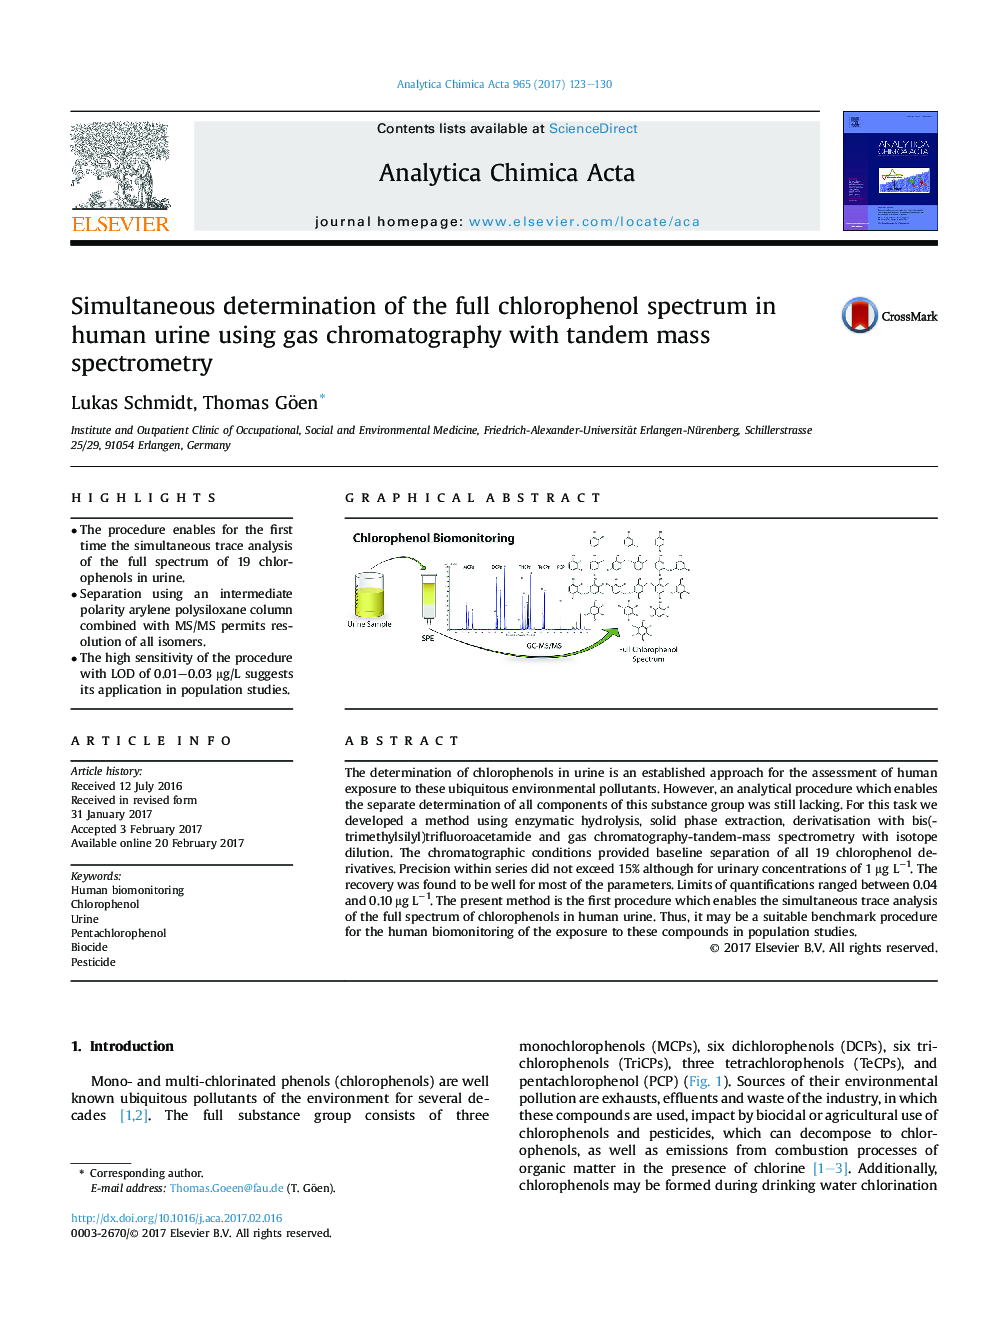 Simultaneous determination of the full chlorophenol spectrum in human urine using gas chromatography with tandem mass spectrometry